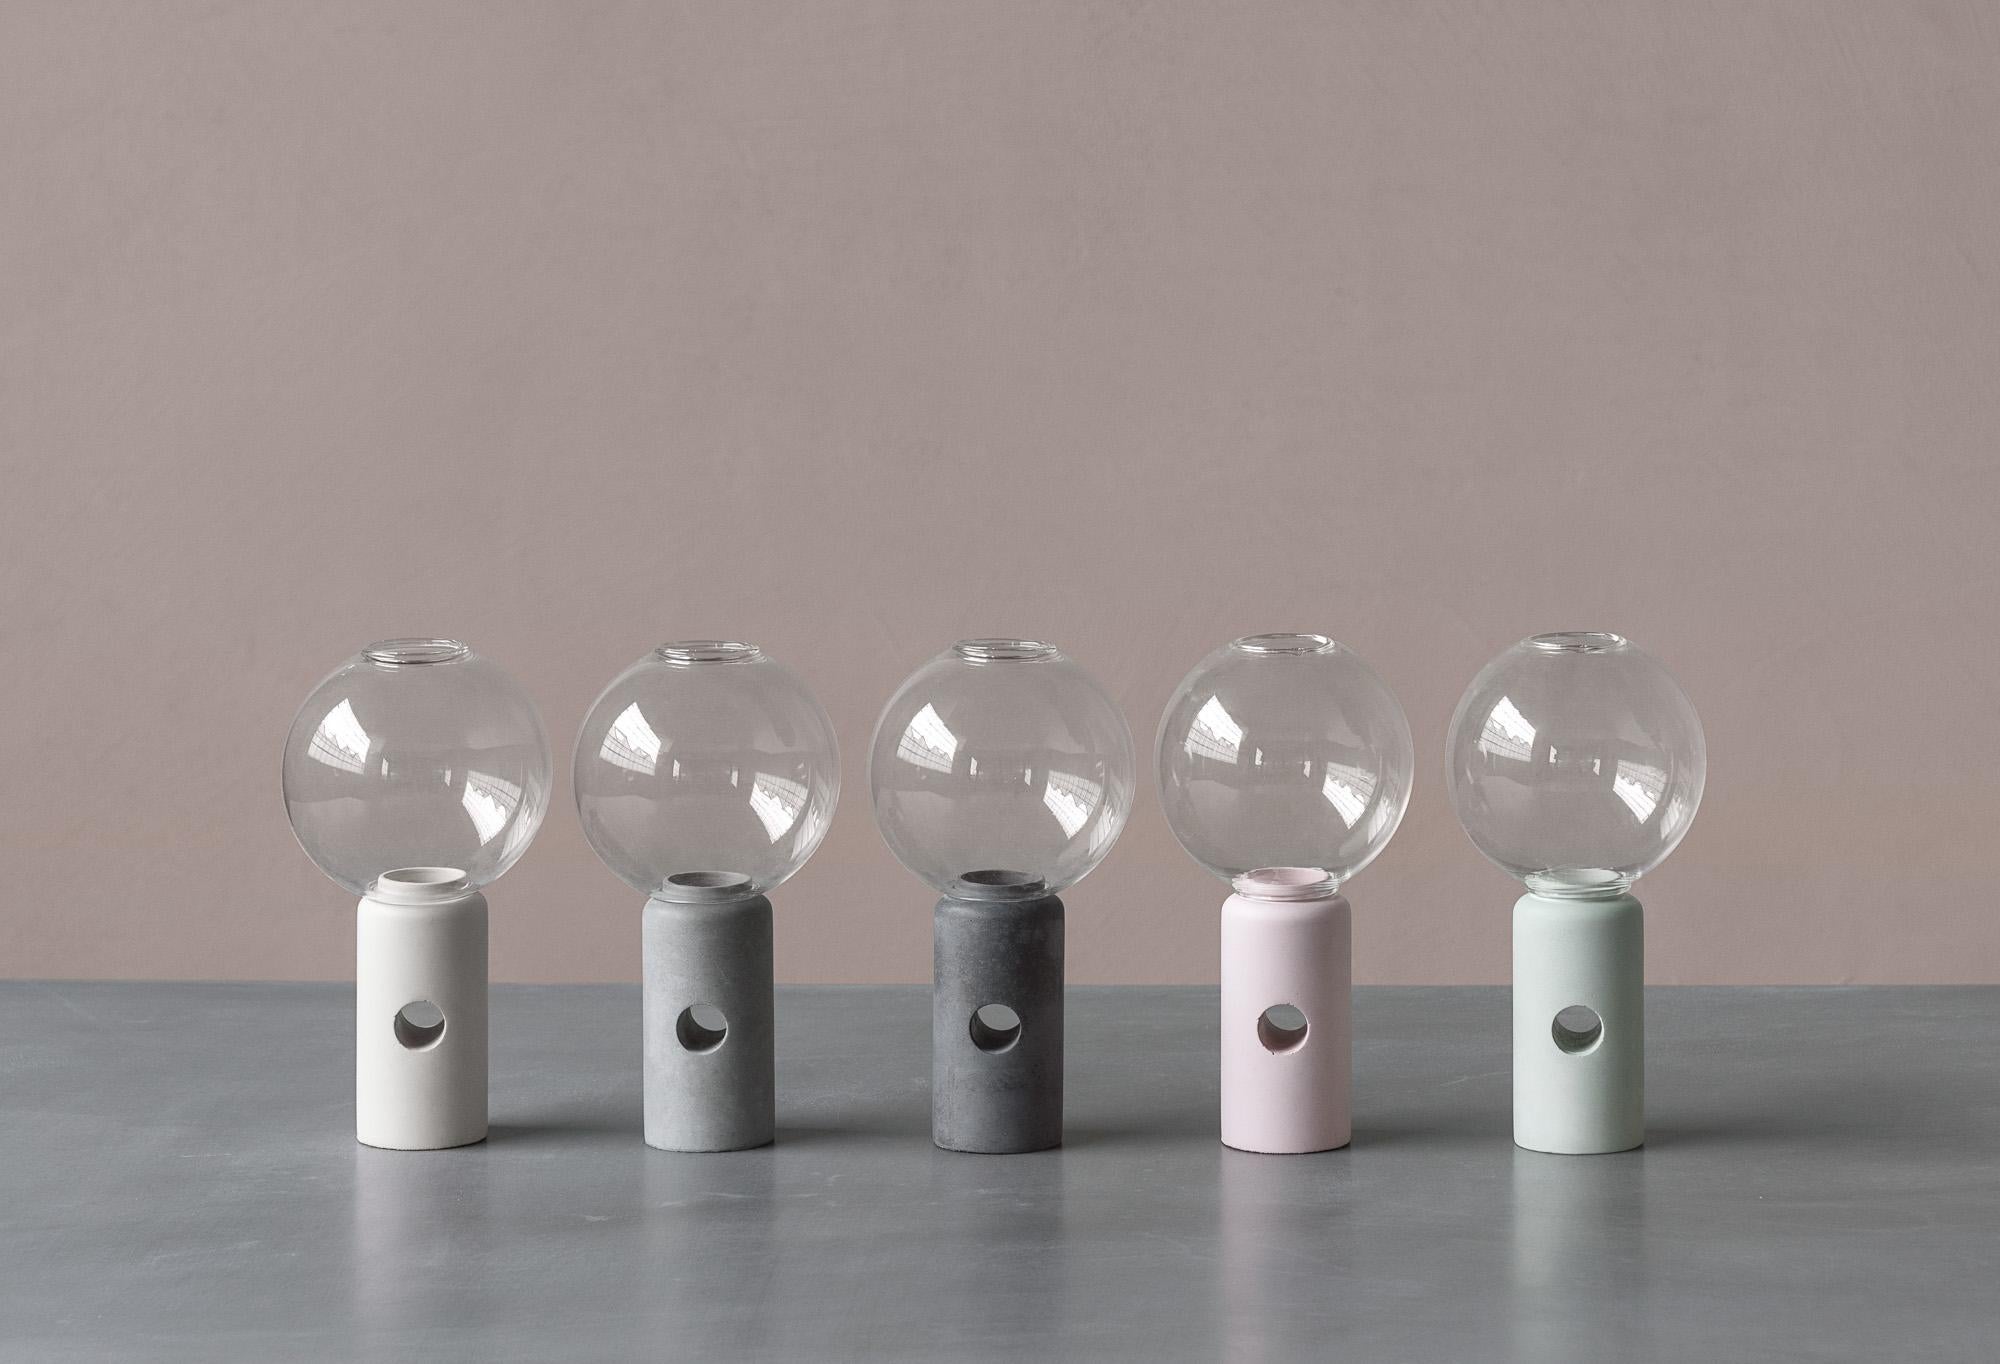 The Efesto candleholder is a design product of craftmanship from the concrete accessories collection by Forma & Cemento. This candleholder is made of concrete and blown glass to create a unique game of materials that refers to the relationship